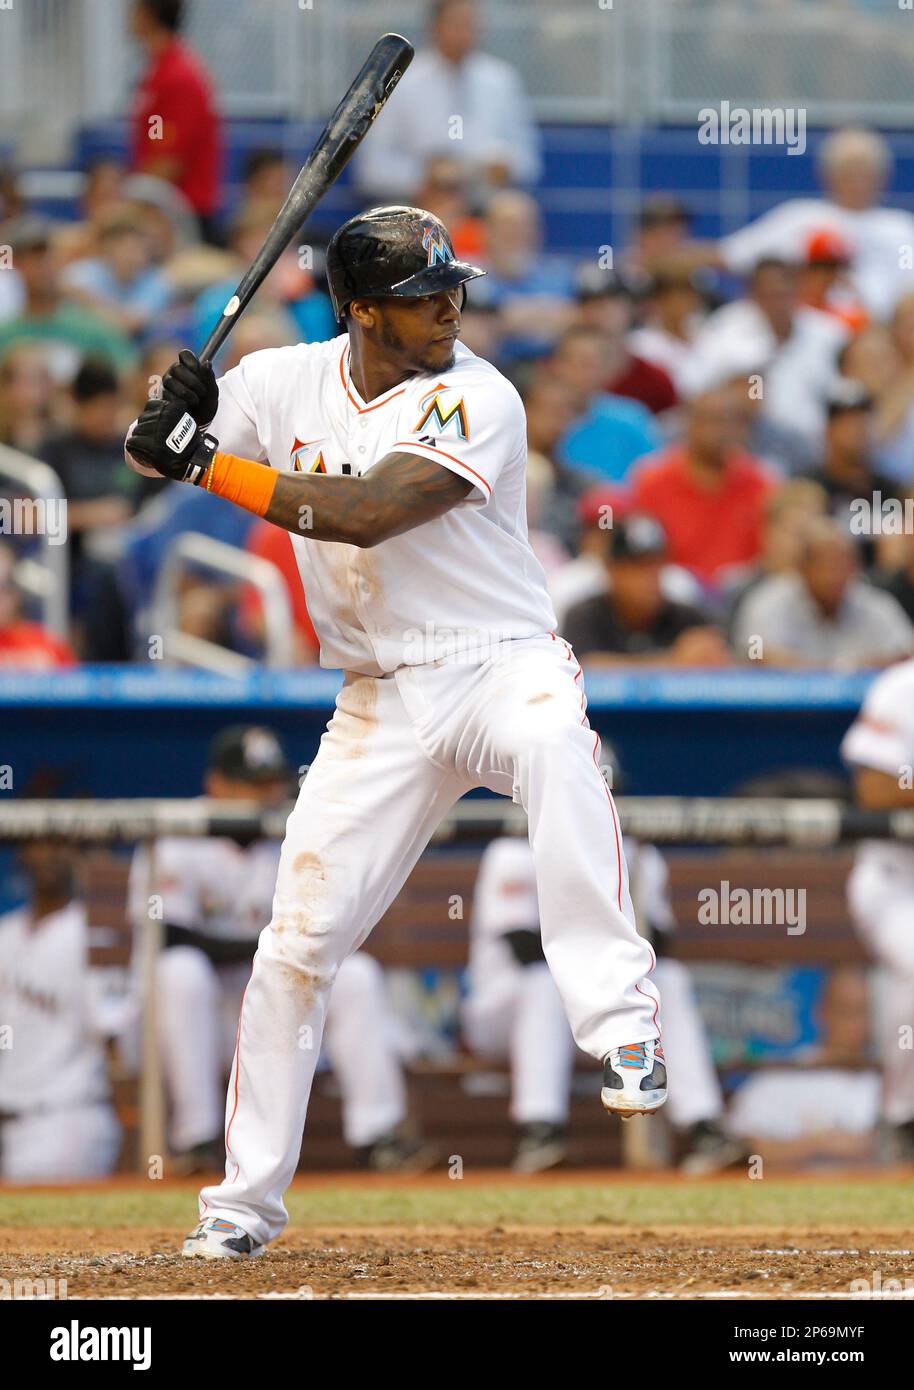 Miami Marlins Hanley Ramirez in a game against the Boston Red Sox in Miami, Florida on June 12,2012 at Marlins Park.(AP Photo/Tom DiPace Stock Photo -  Alamy